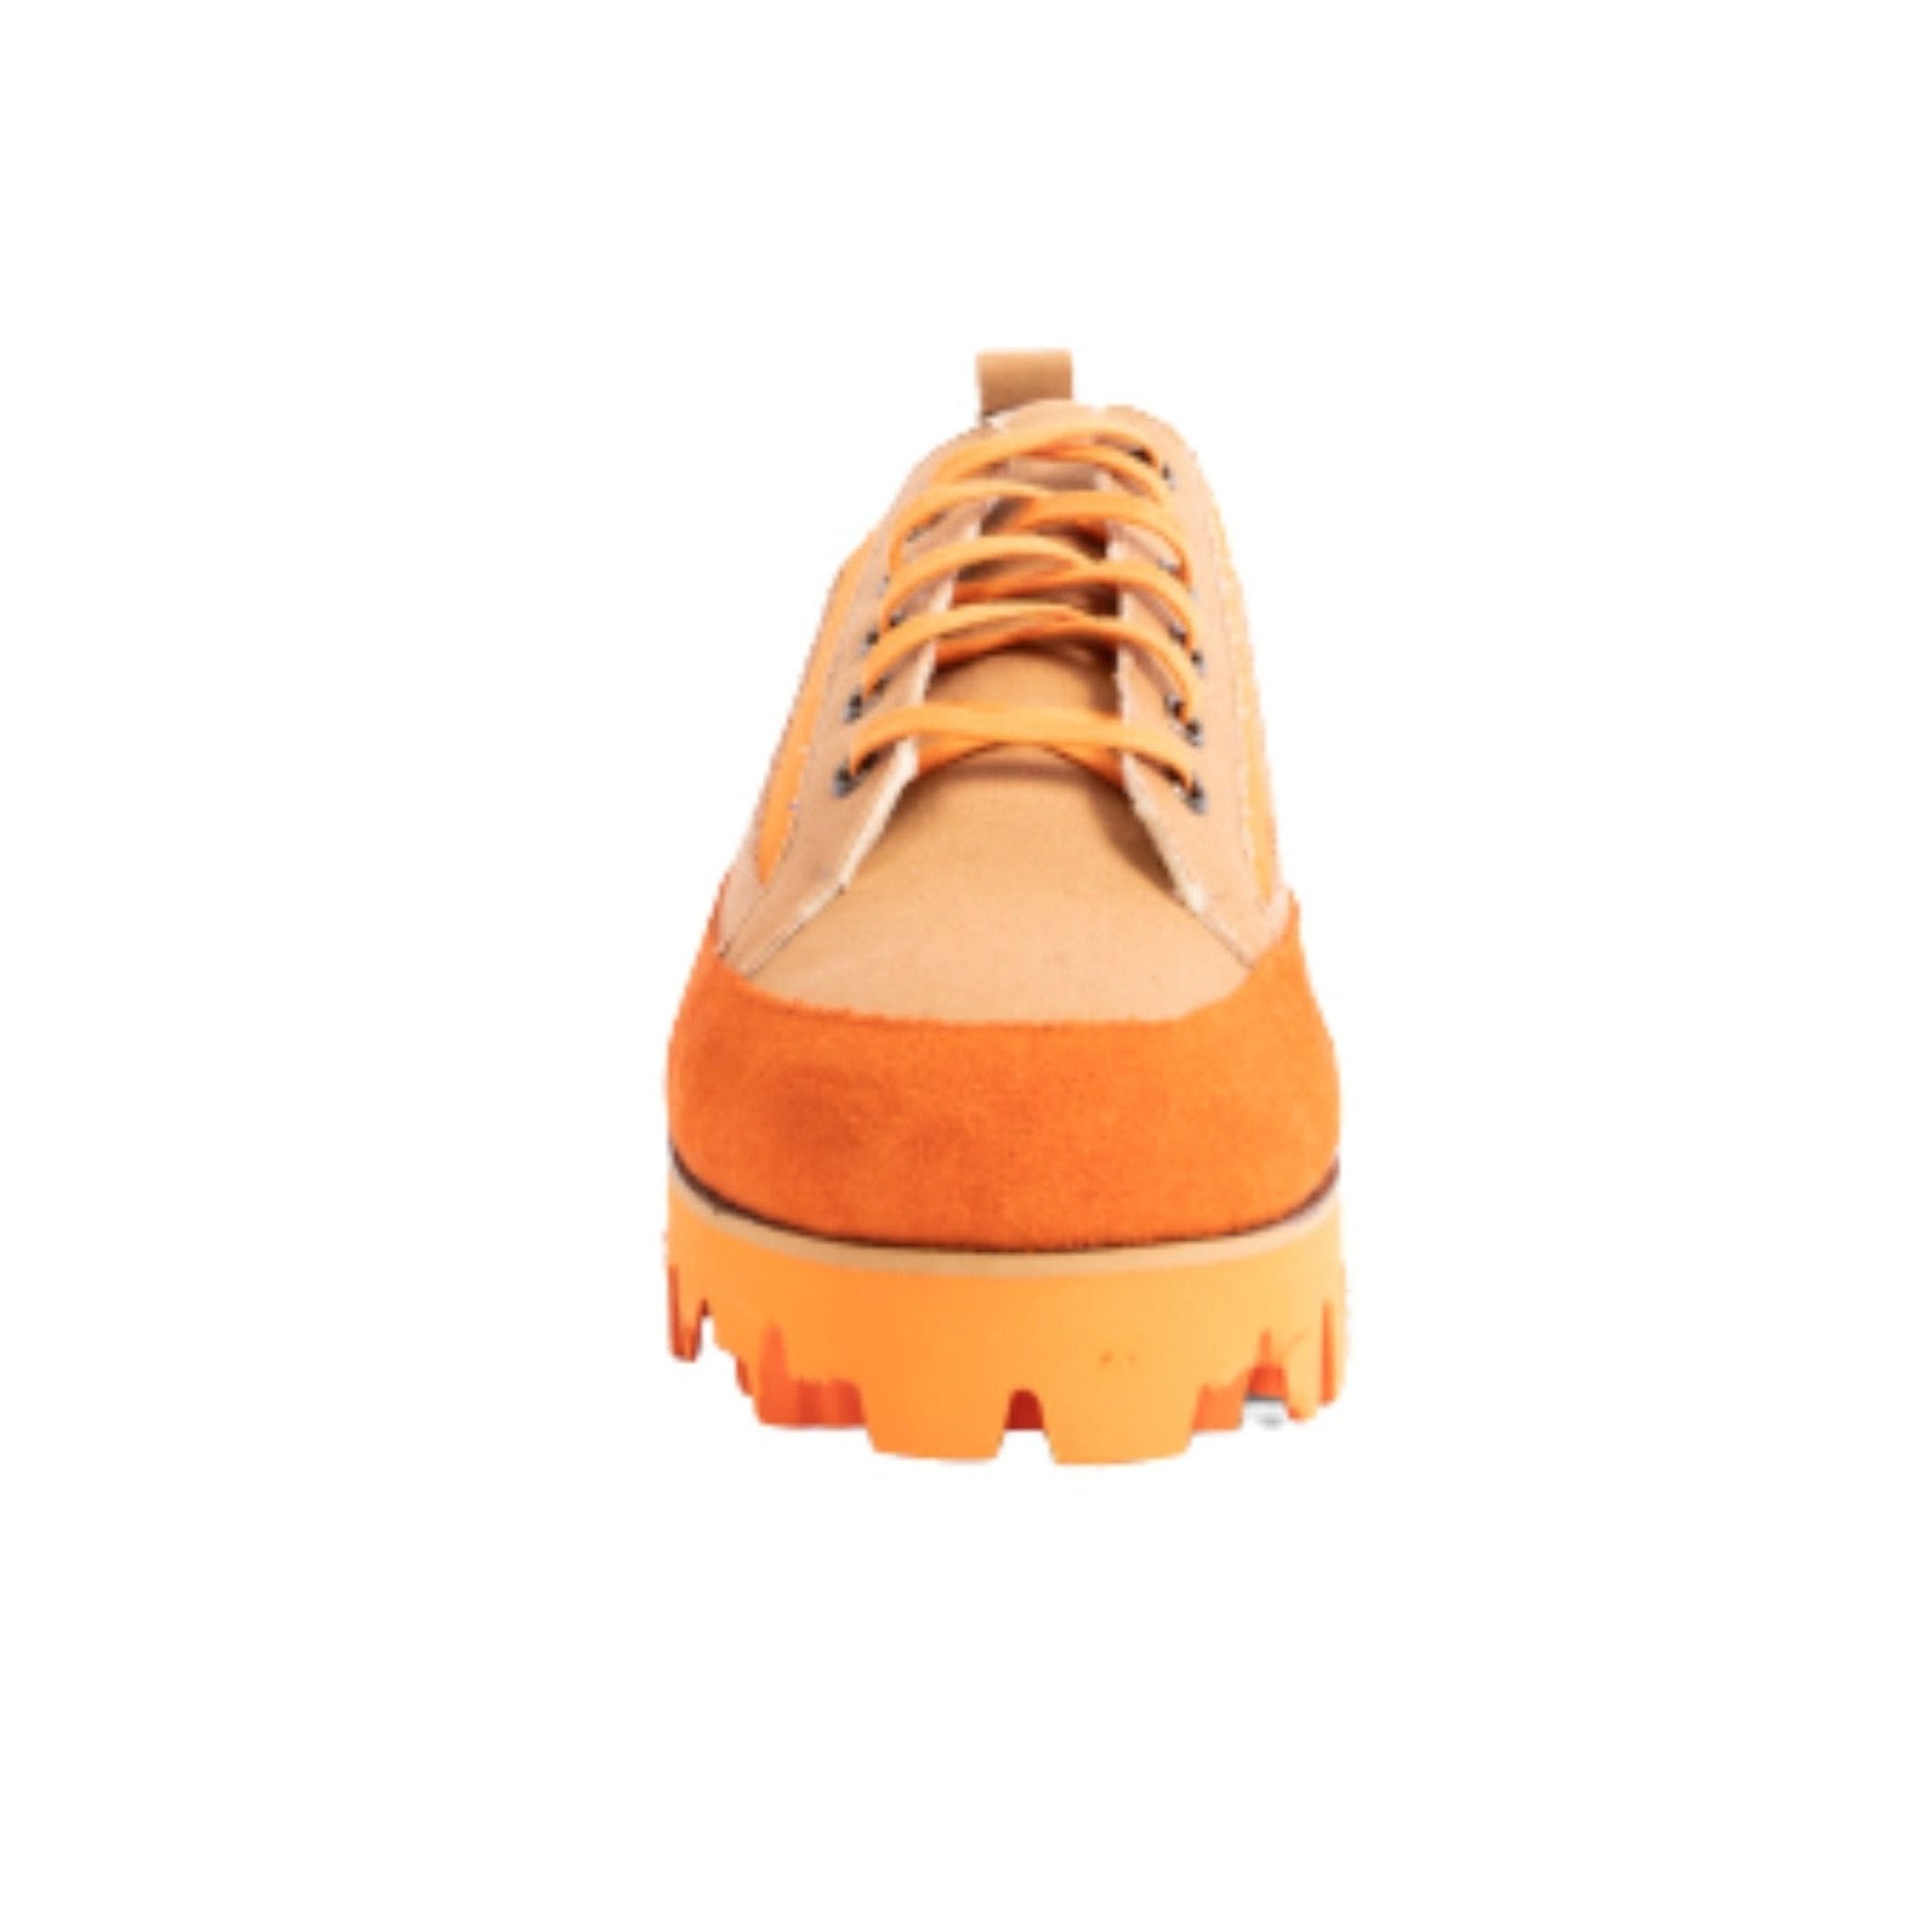 orange canvas suede sneaker large sizes front